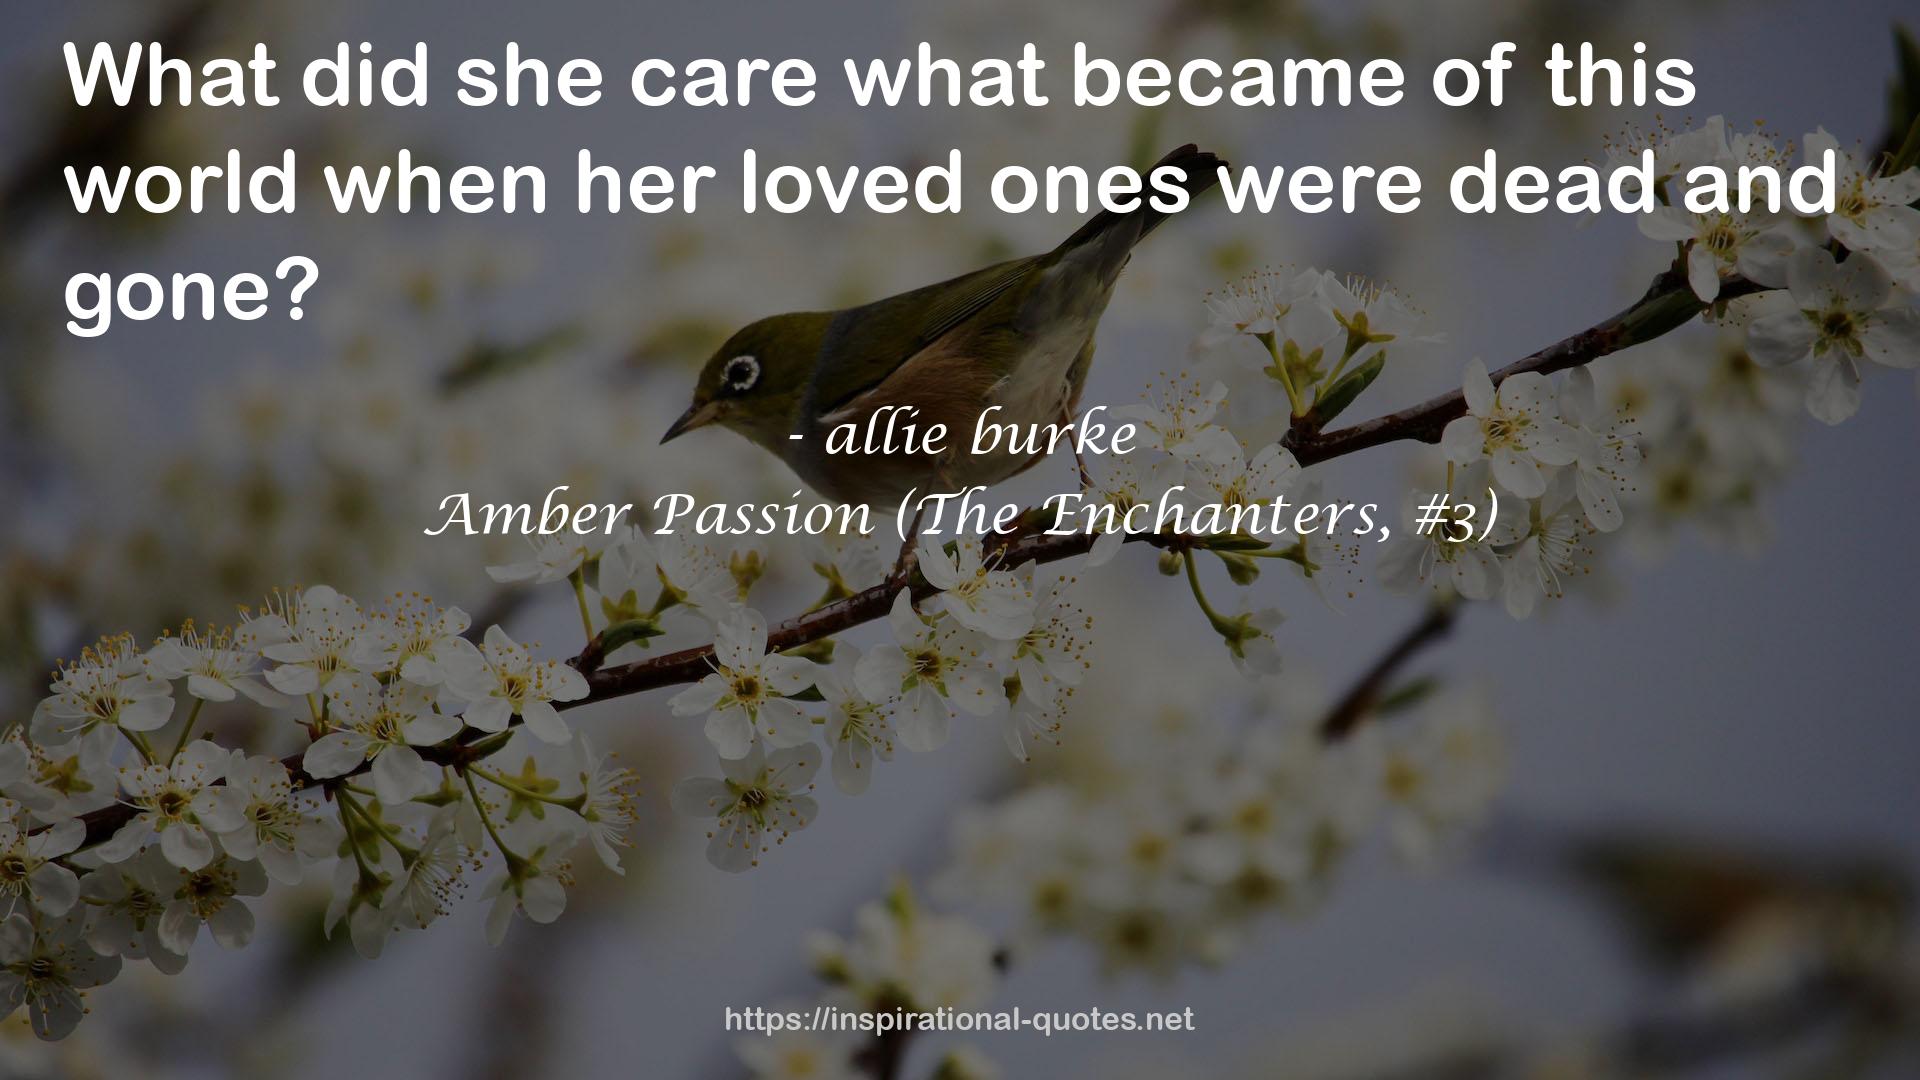 Amber Passion (The Enchanters, #3) QUOTES